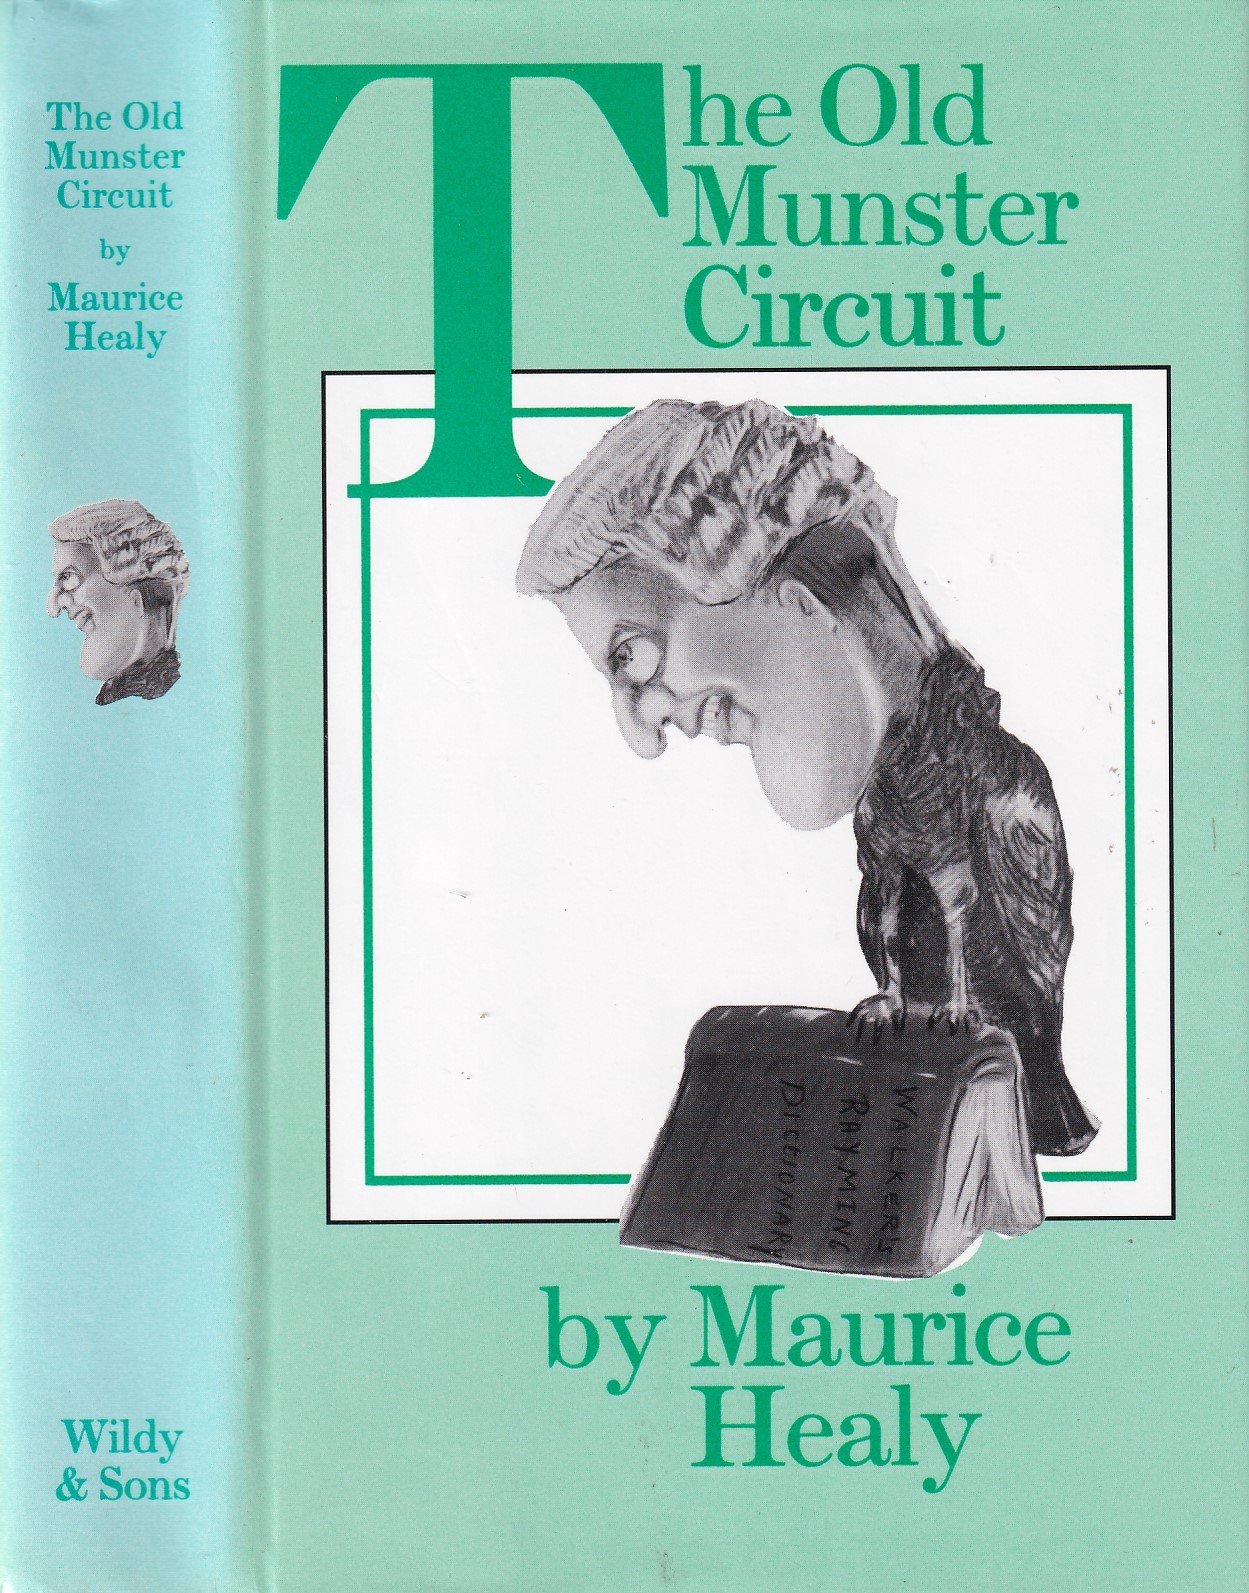 The Old Munster Circuit by Maurice Healy